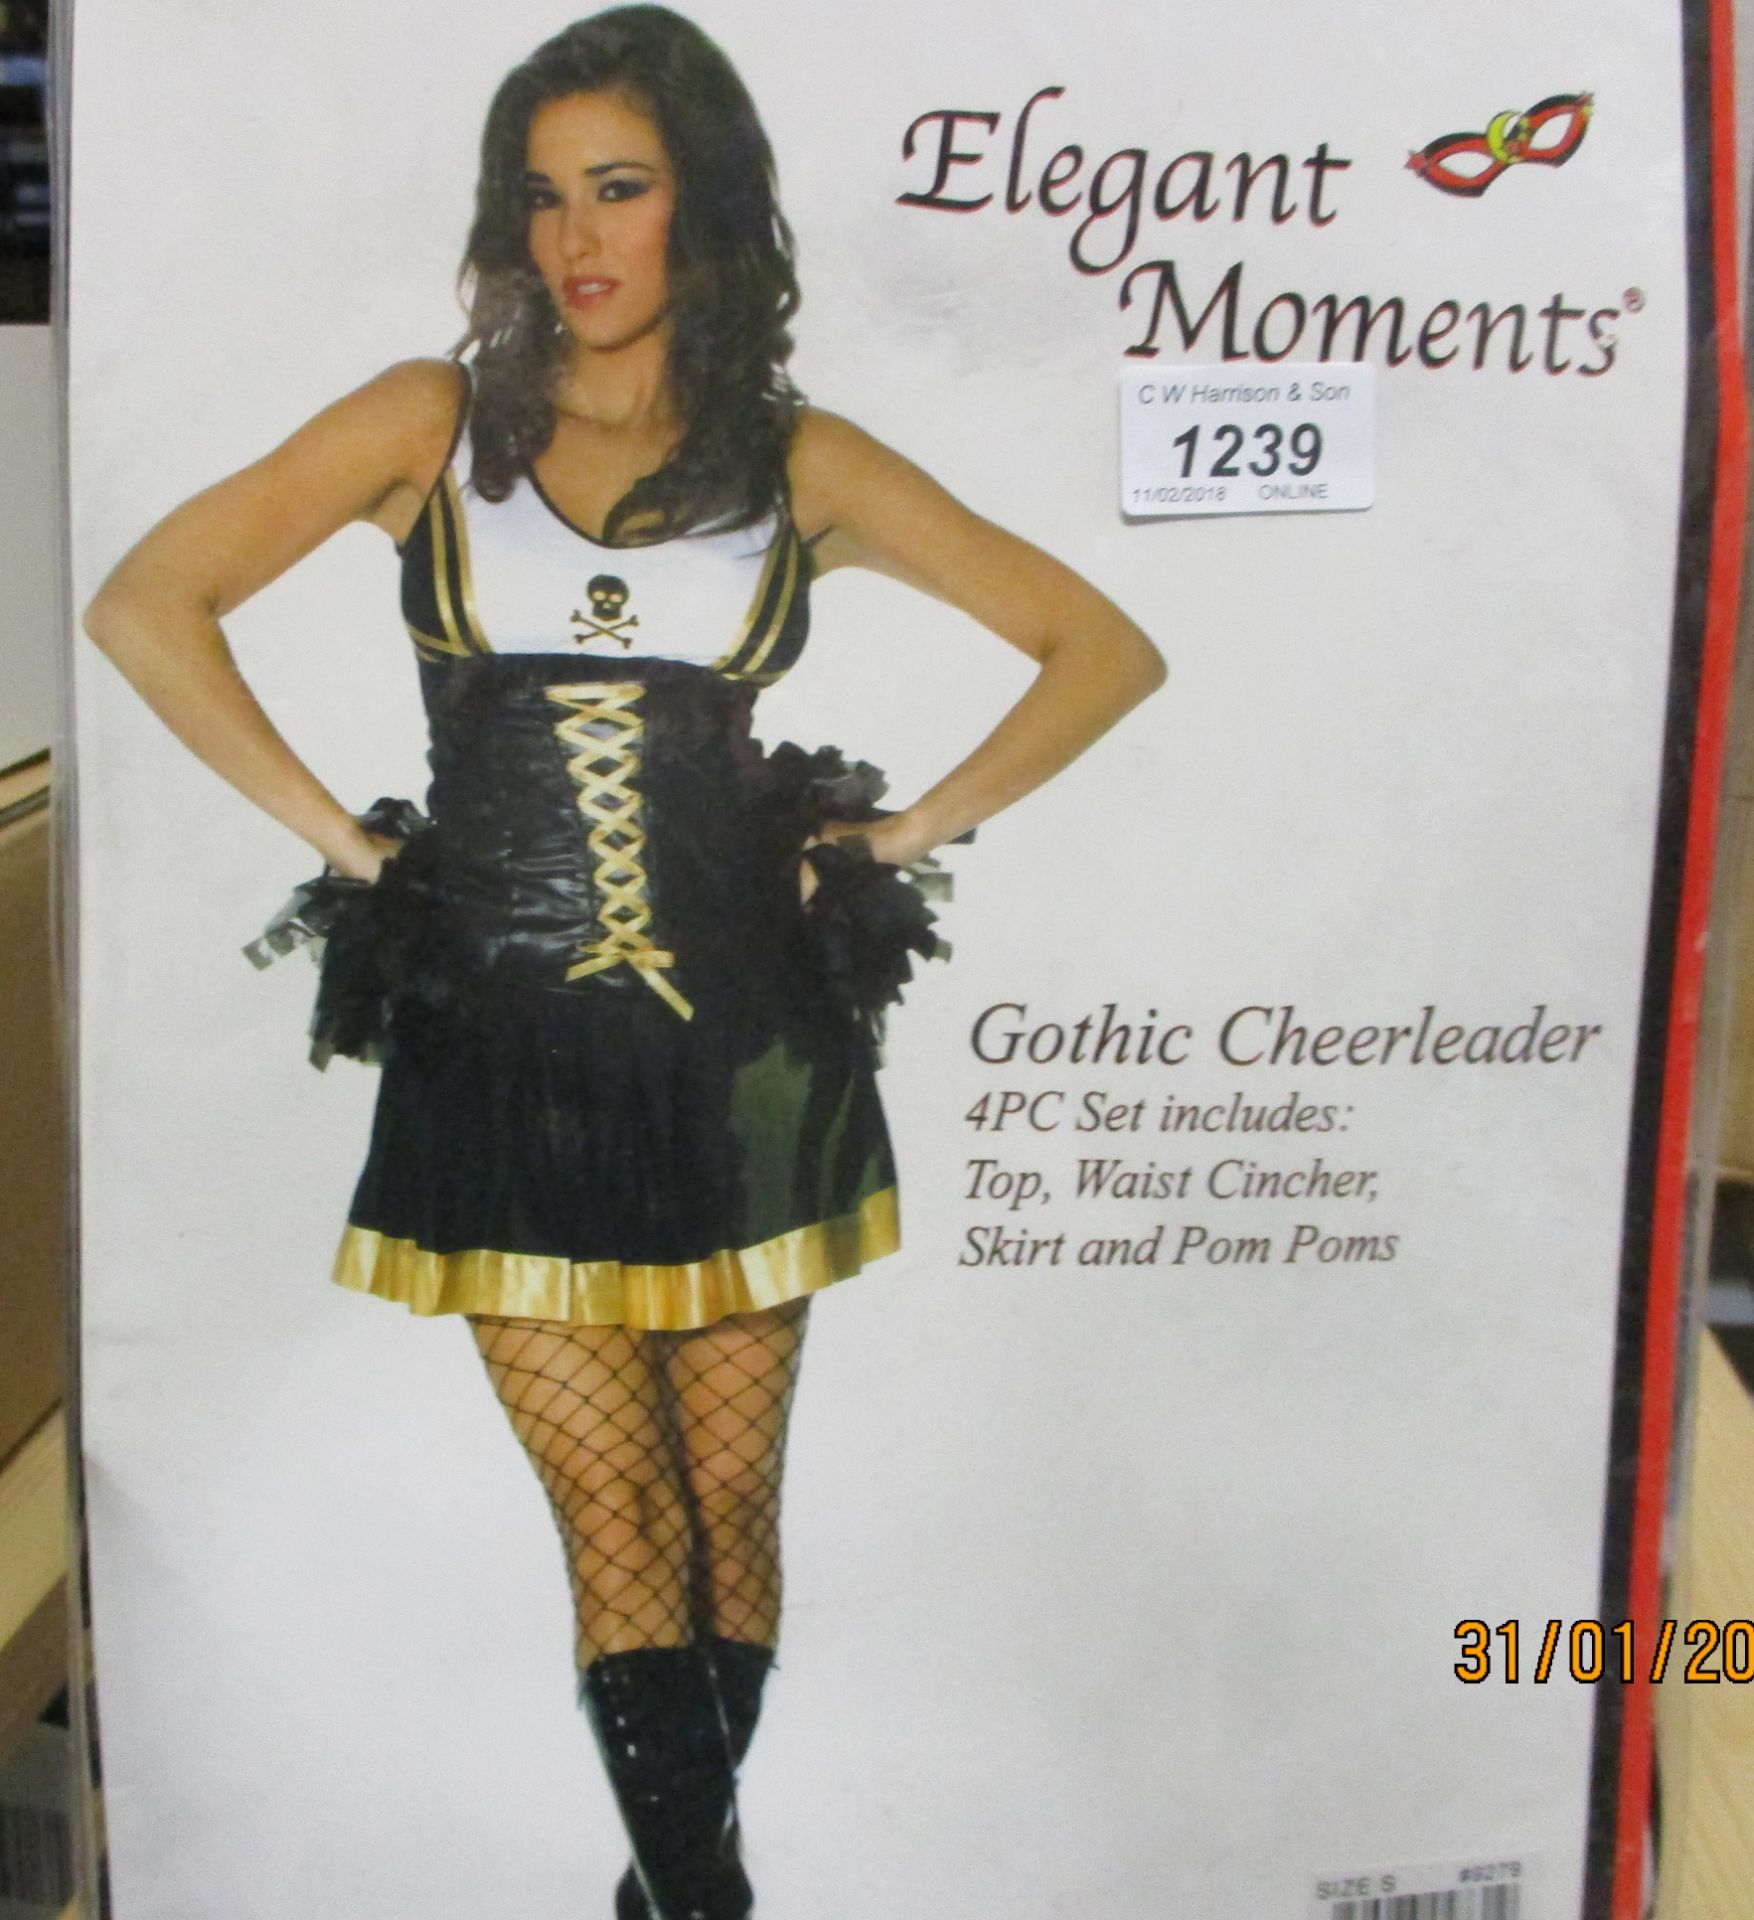 14 x Elegant Moments ladies assorted fancy dress costumes (assorted sizes) - box not included